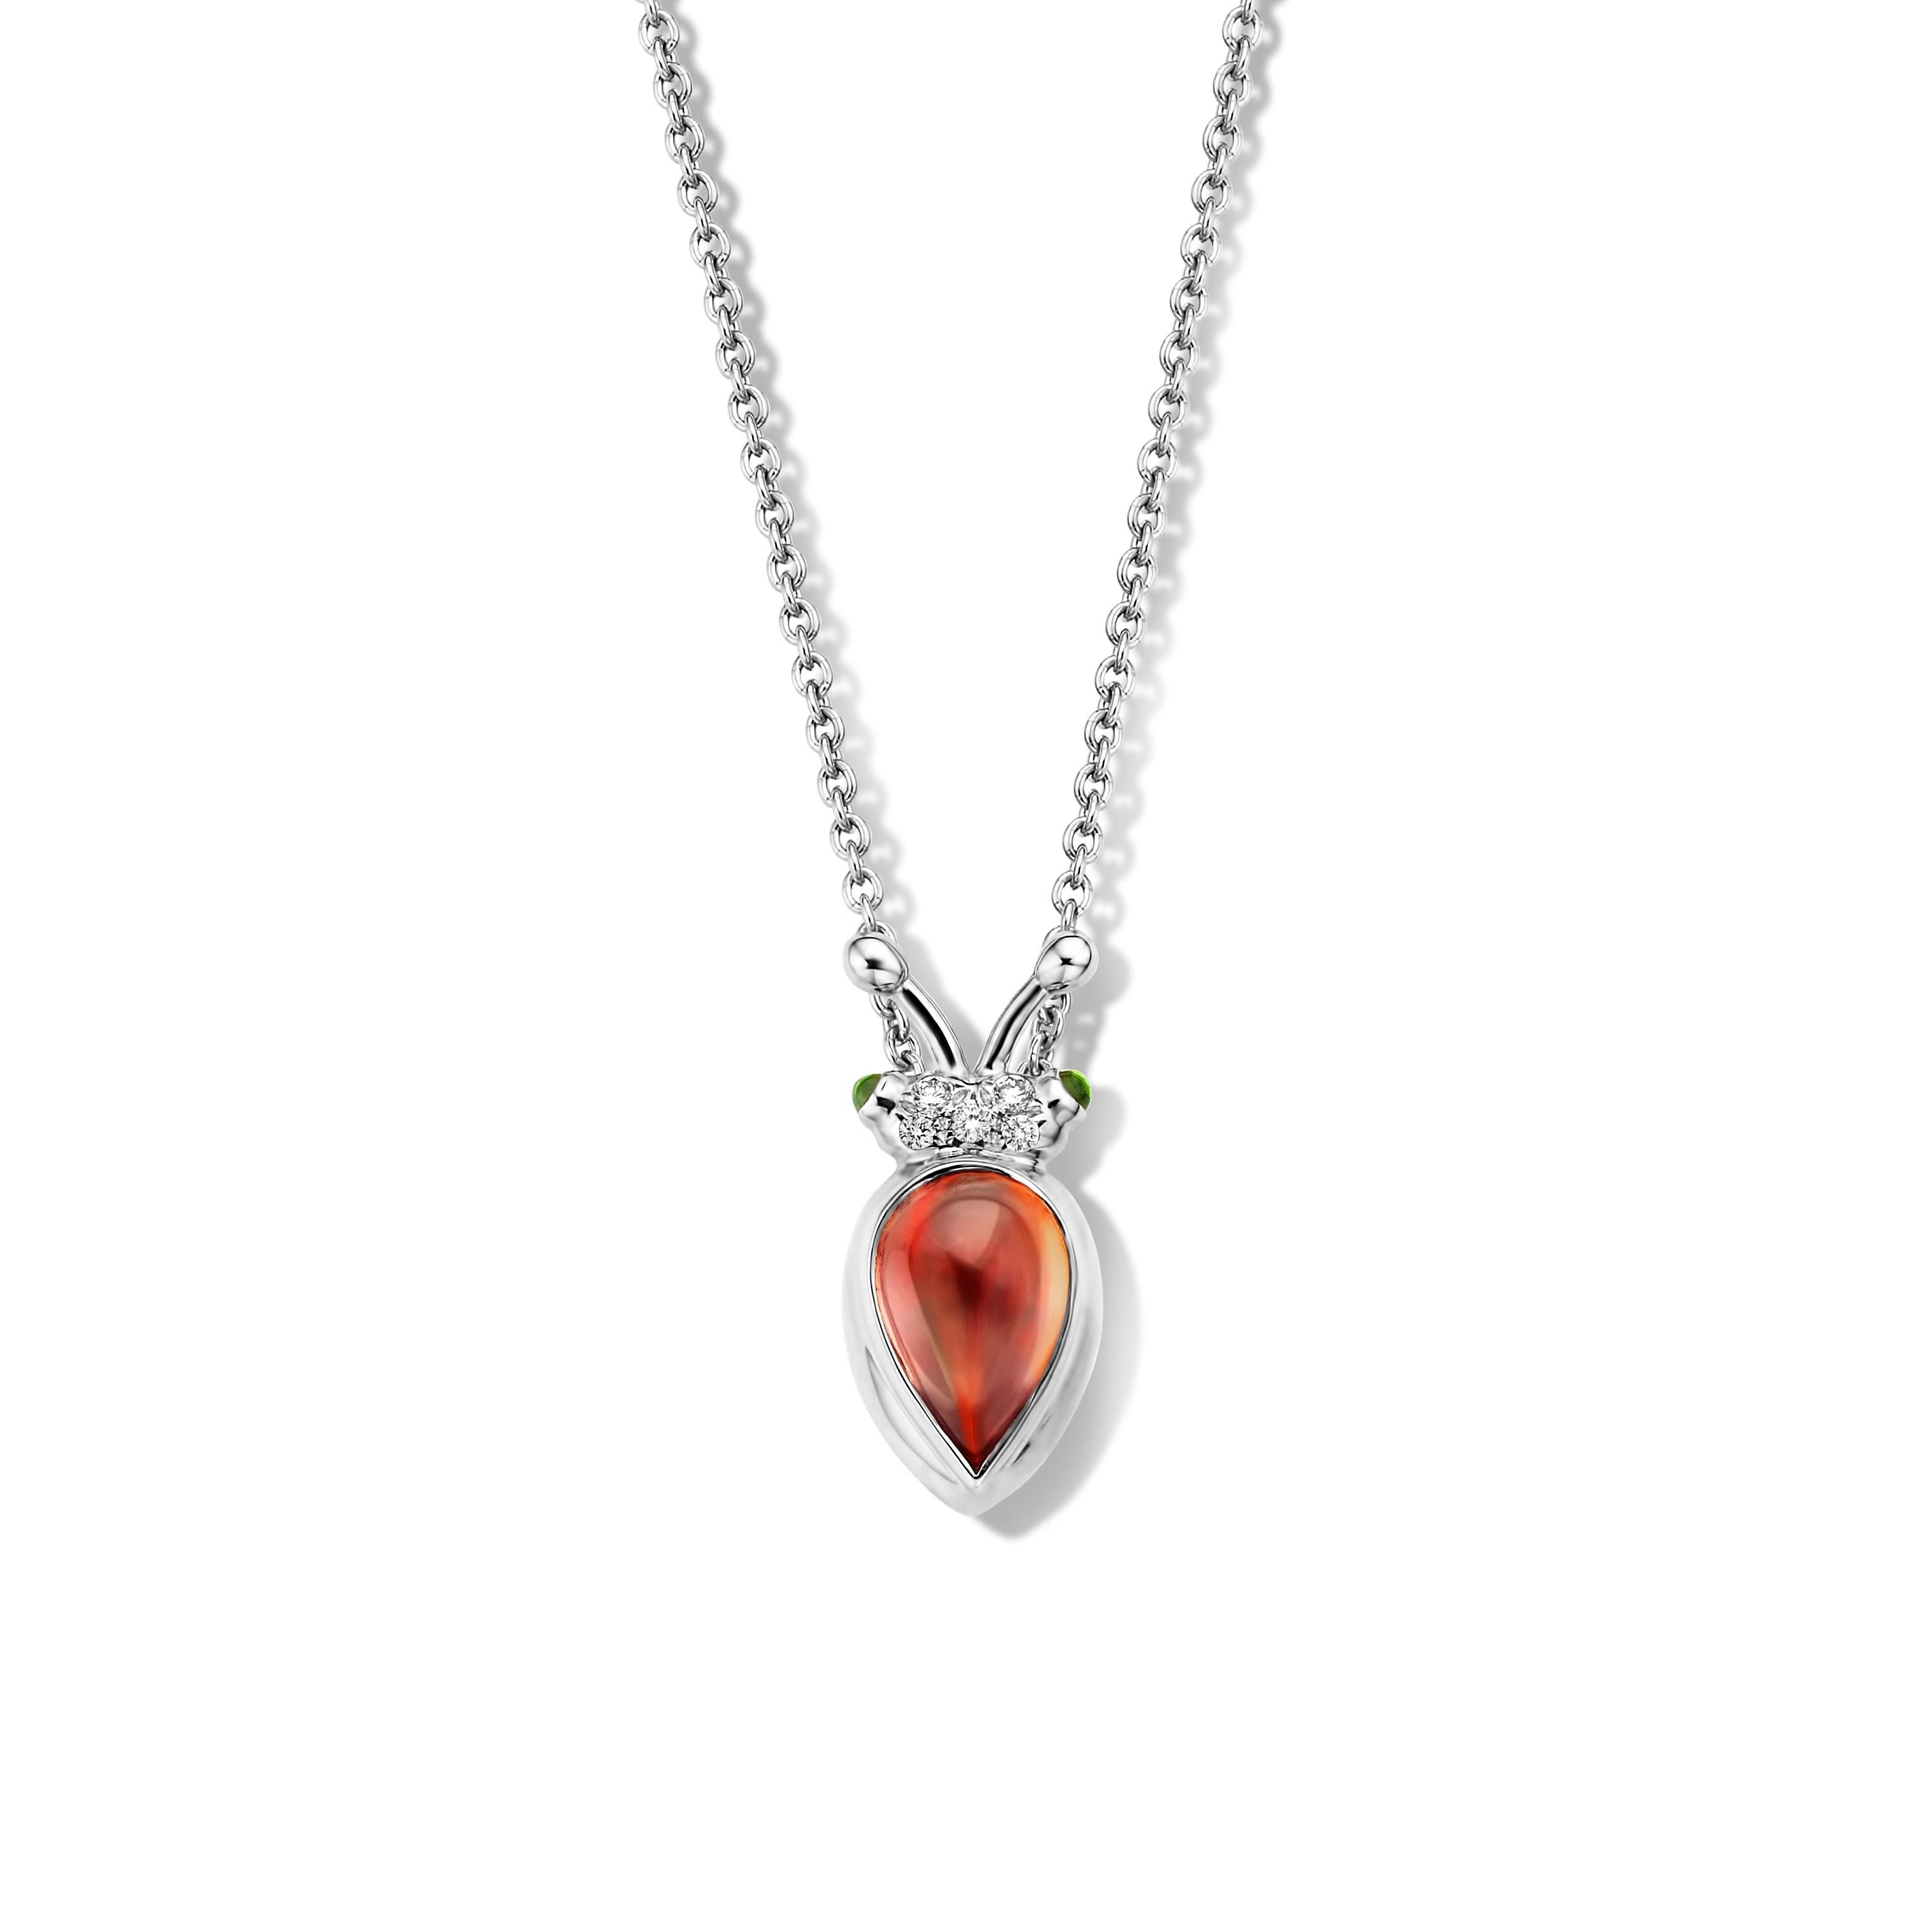 One of a kind lucky beetle necklace in 18K white gold 6g created by jewelry designer Celine Roelens. This necklace is set with the finest diamonds in brilliant cut 0,04Ct (VVS/DEF quality) and one natural, mandarin  garnet in pear cabouchon cut